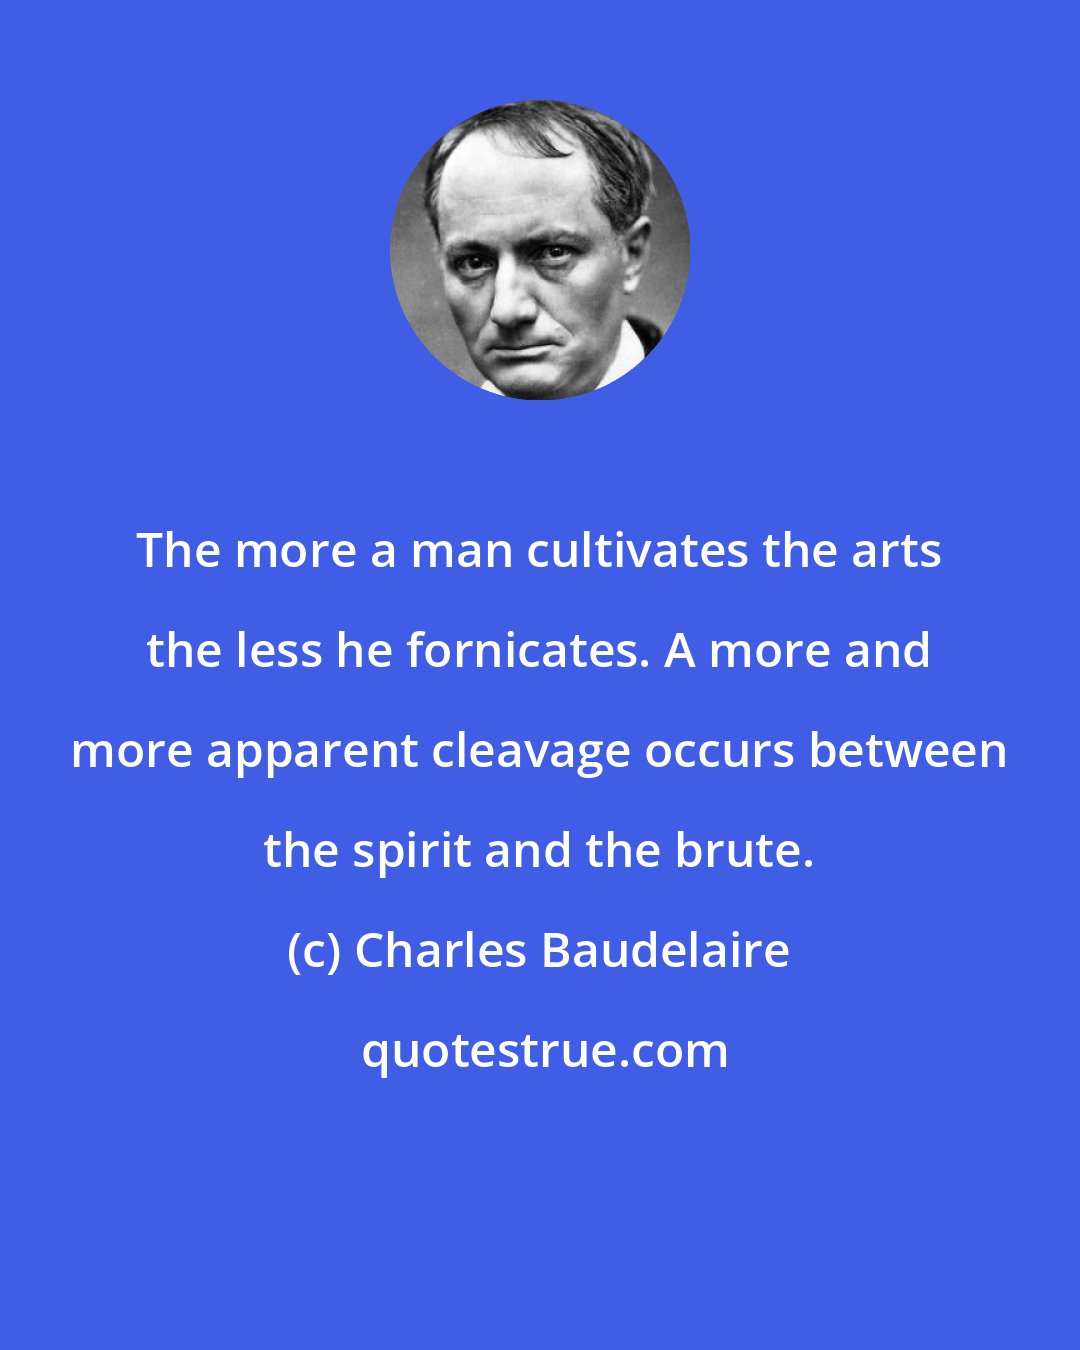 Charles Baudelaire: The more a man cultivates the arts the less he fornicates. A more and more apparent cleavage occurs between the spirit and the brute.